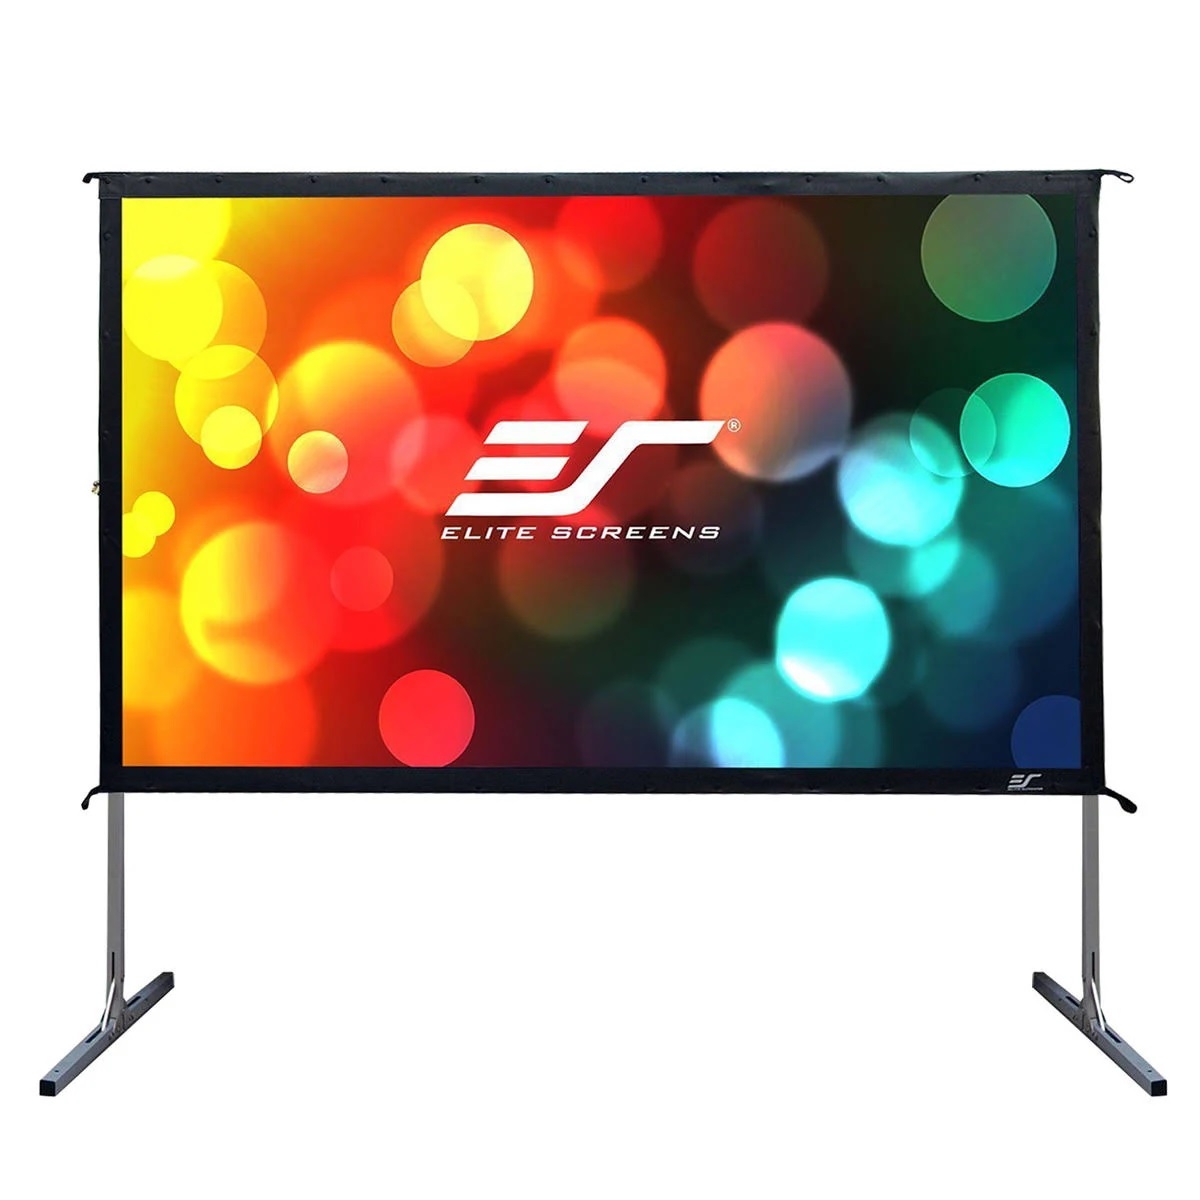 Elite Screens Inc. Elite Screens Yard Master 2 Series OMS120H2 Projection Screen with Legs - Silver